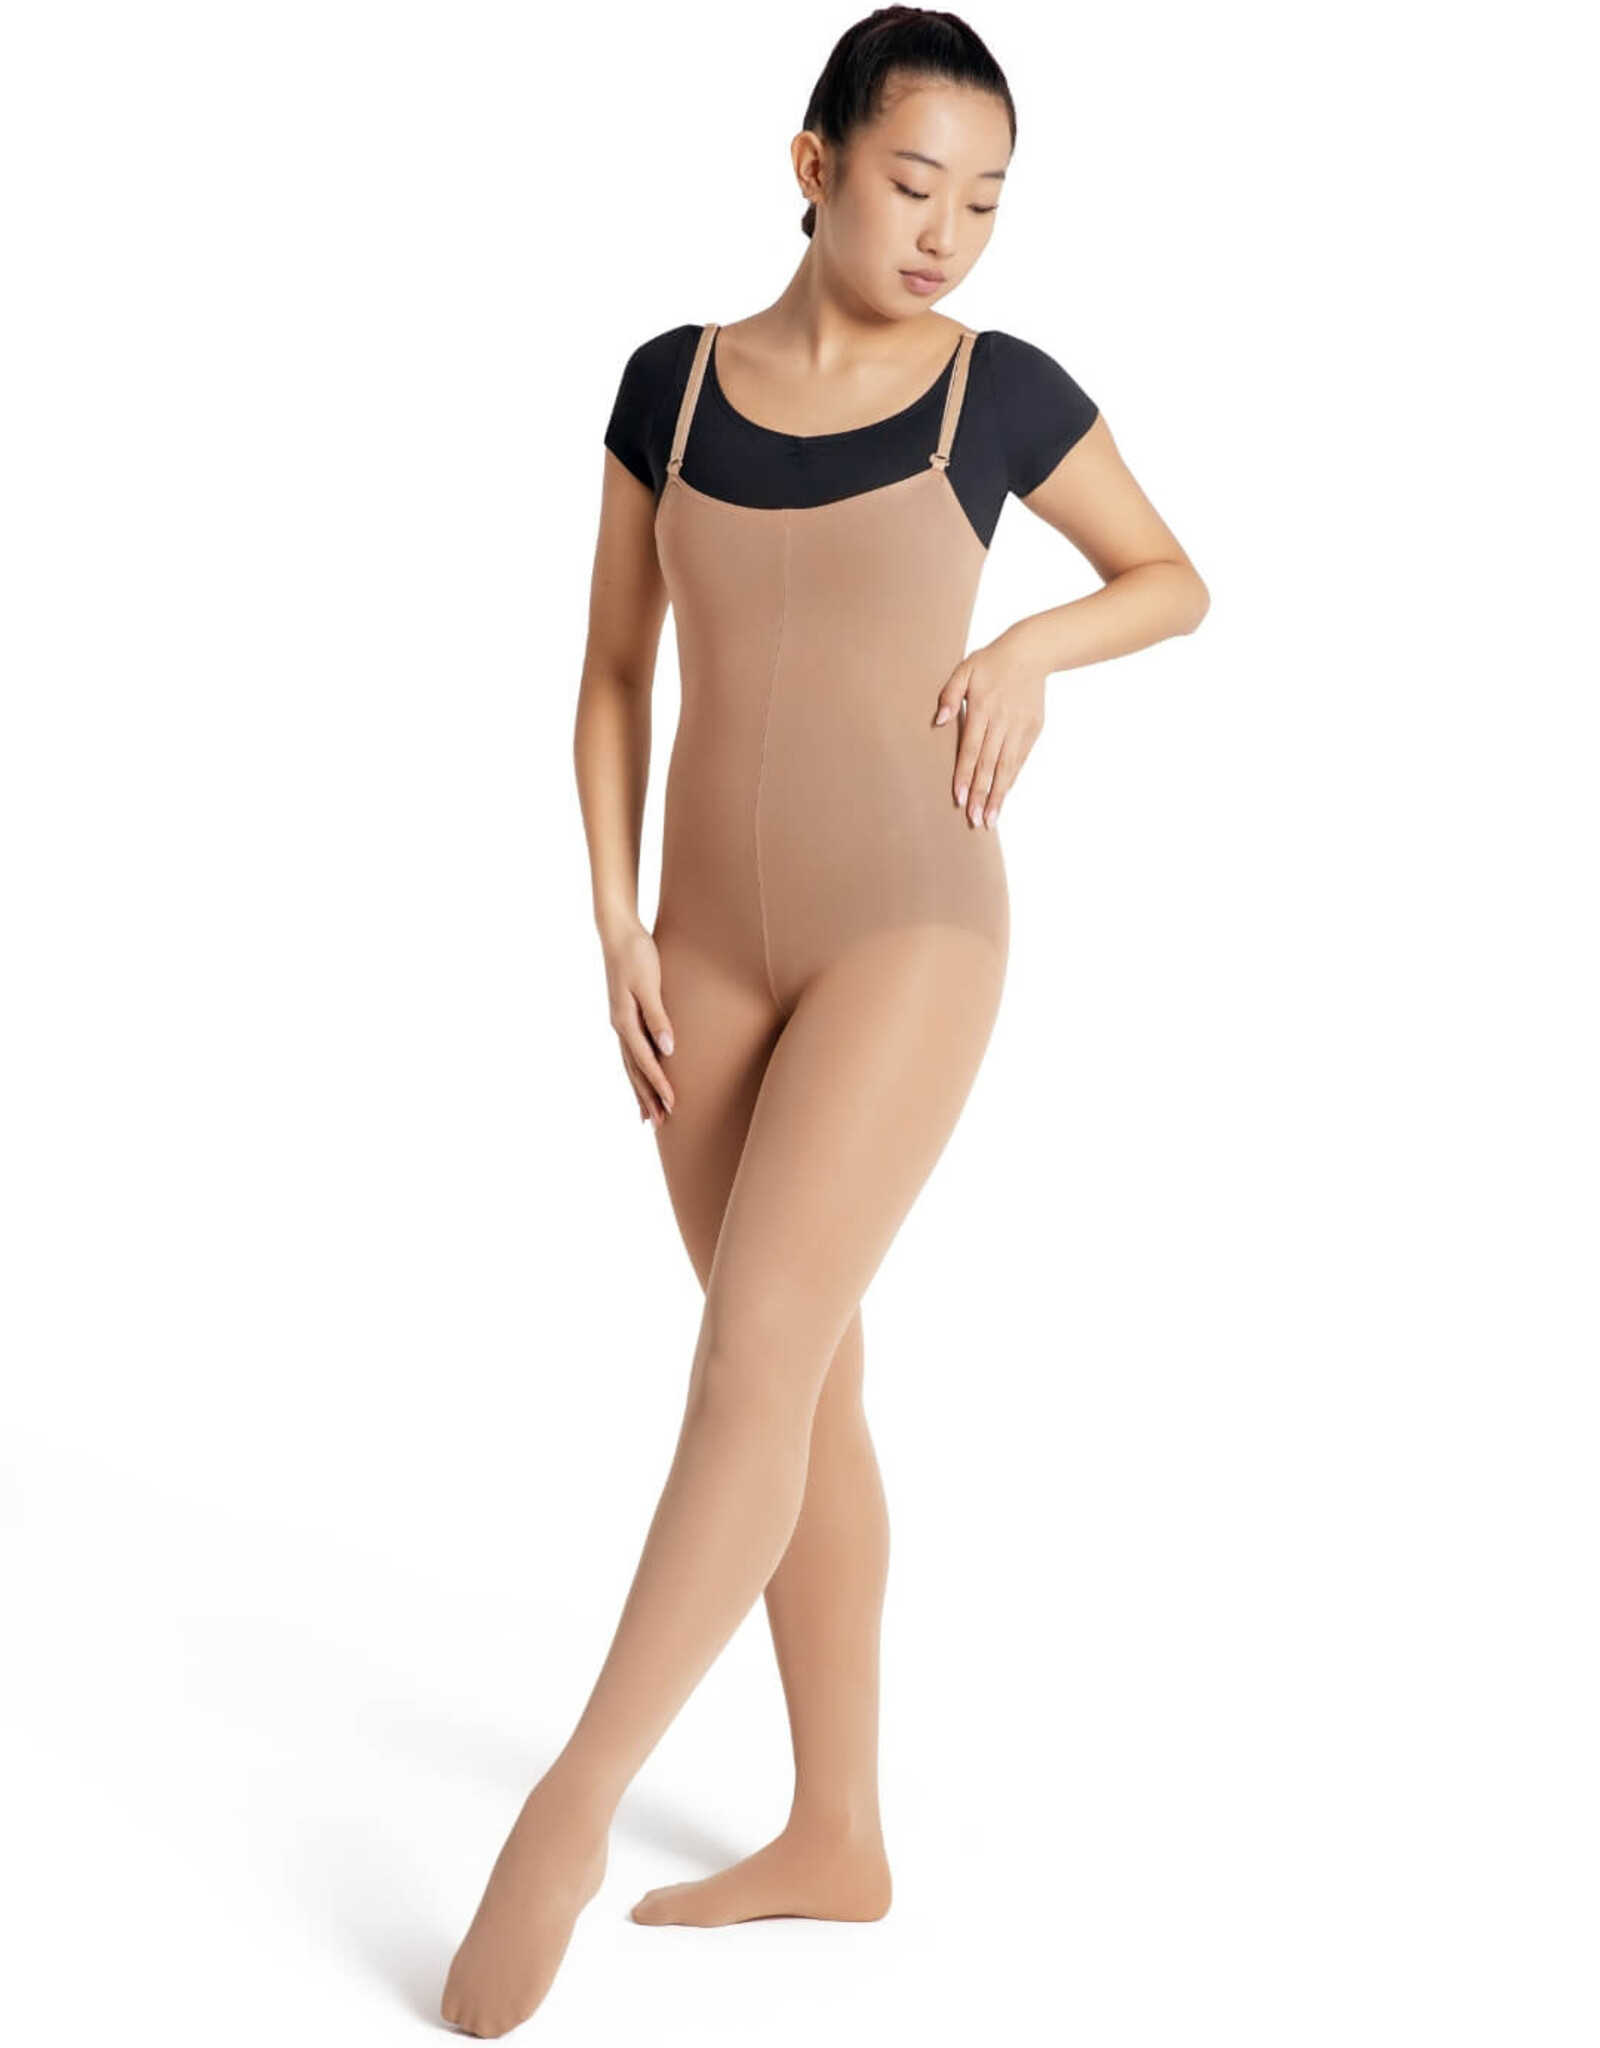 Capezio Adult  Bodytight with Transition Foot 1811W